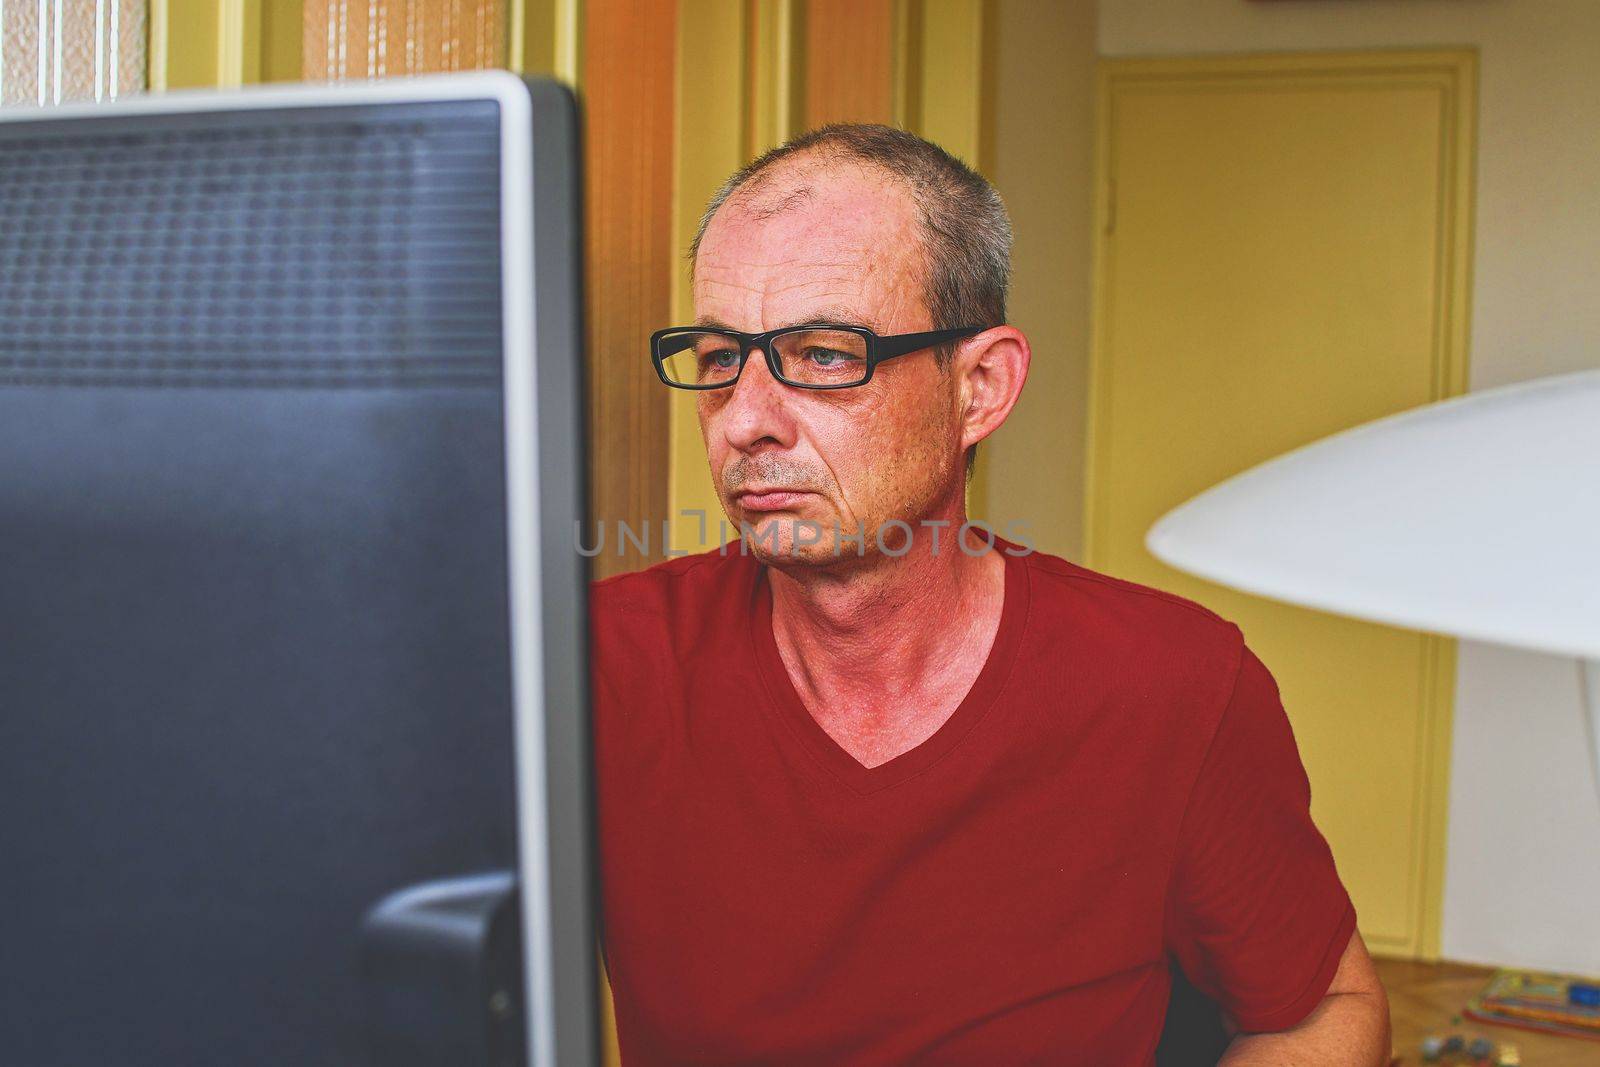 Middle aged man with glasses sitting at desk. Mature man using personal computer. Senior concept.  Man  working at home office.  by roman_nerud